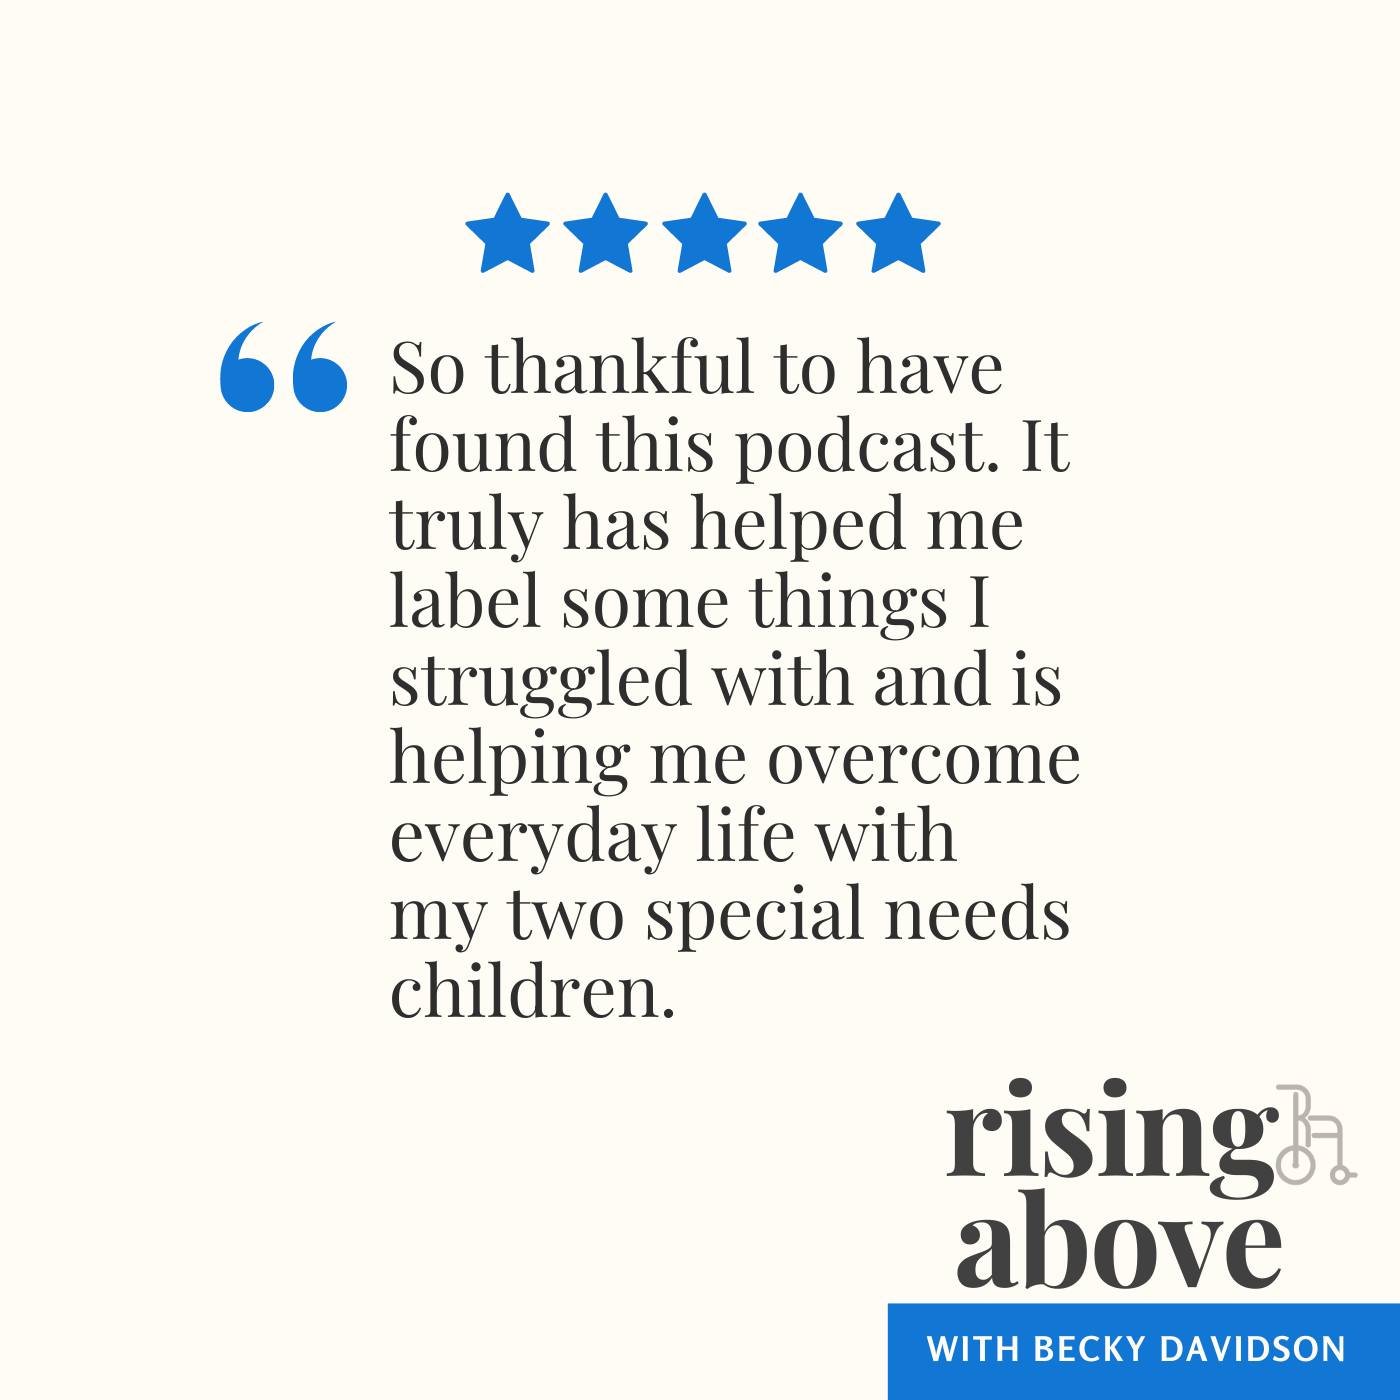 We are so grateful for podcast reviews like this one recently! Did you know podcast reviews help others find our podcast more easily? 

We KNOW the value of hearing others who understand your struggles and hearing truth that encourages you on your jo